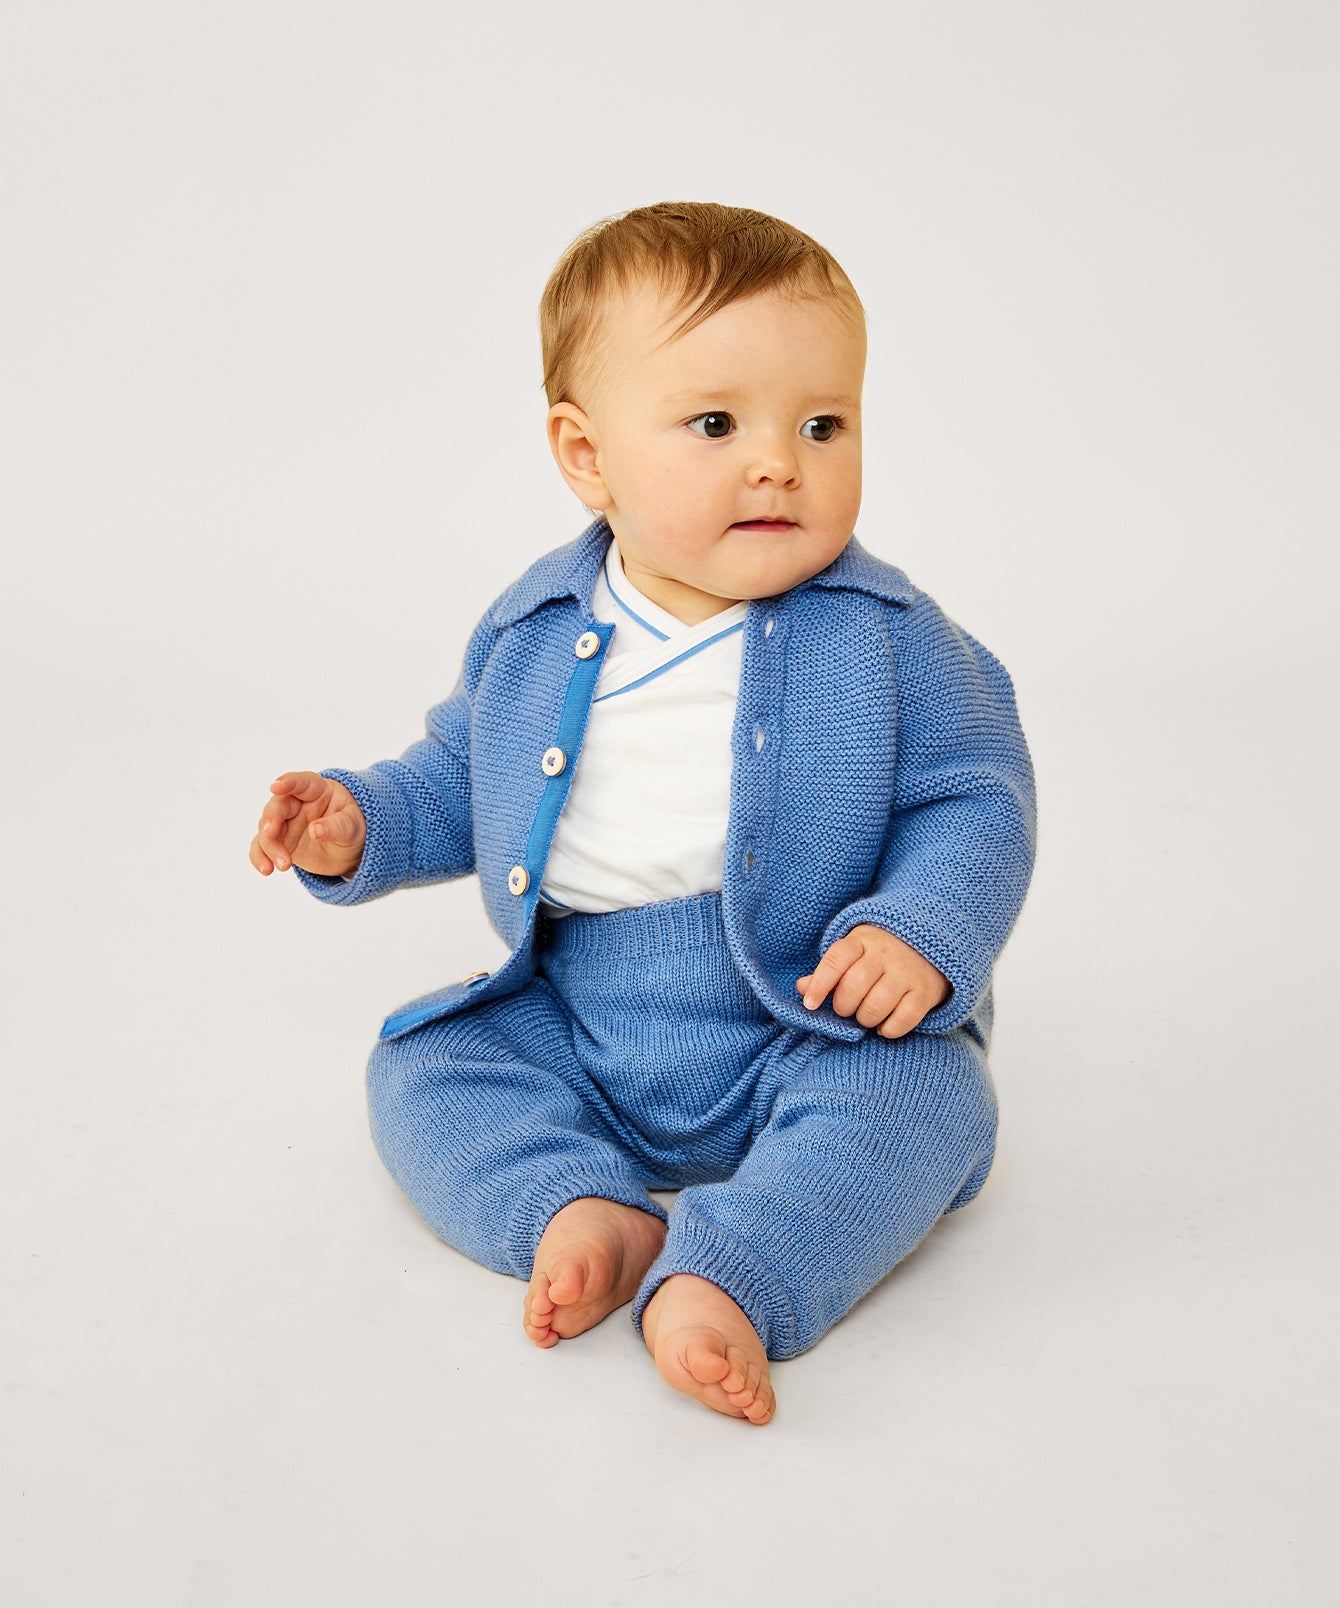 Warm Knit Set for Baby | Oso & Me